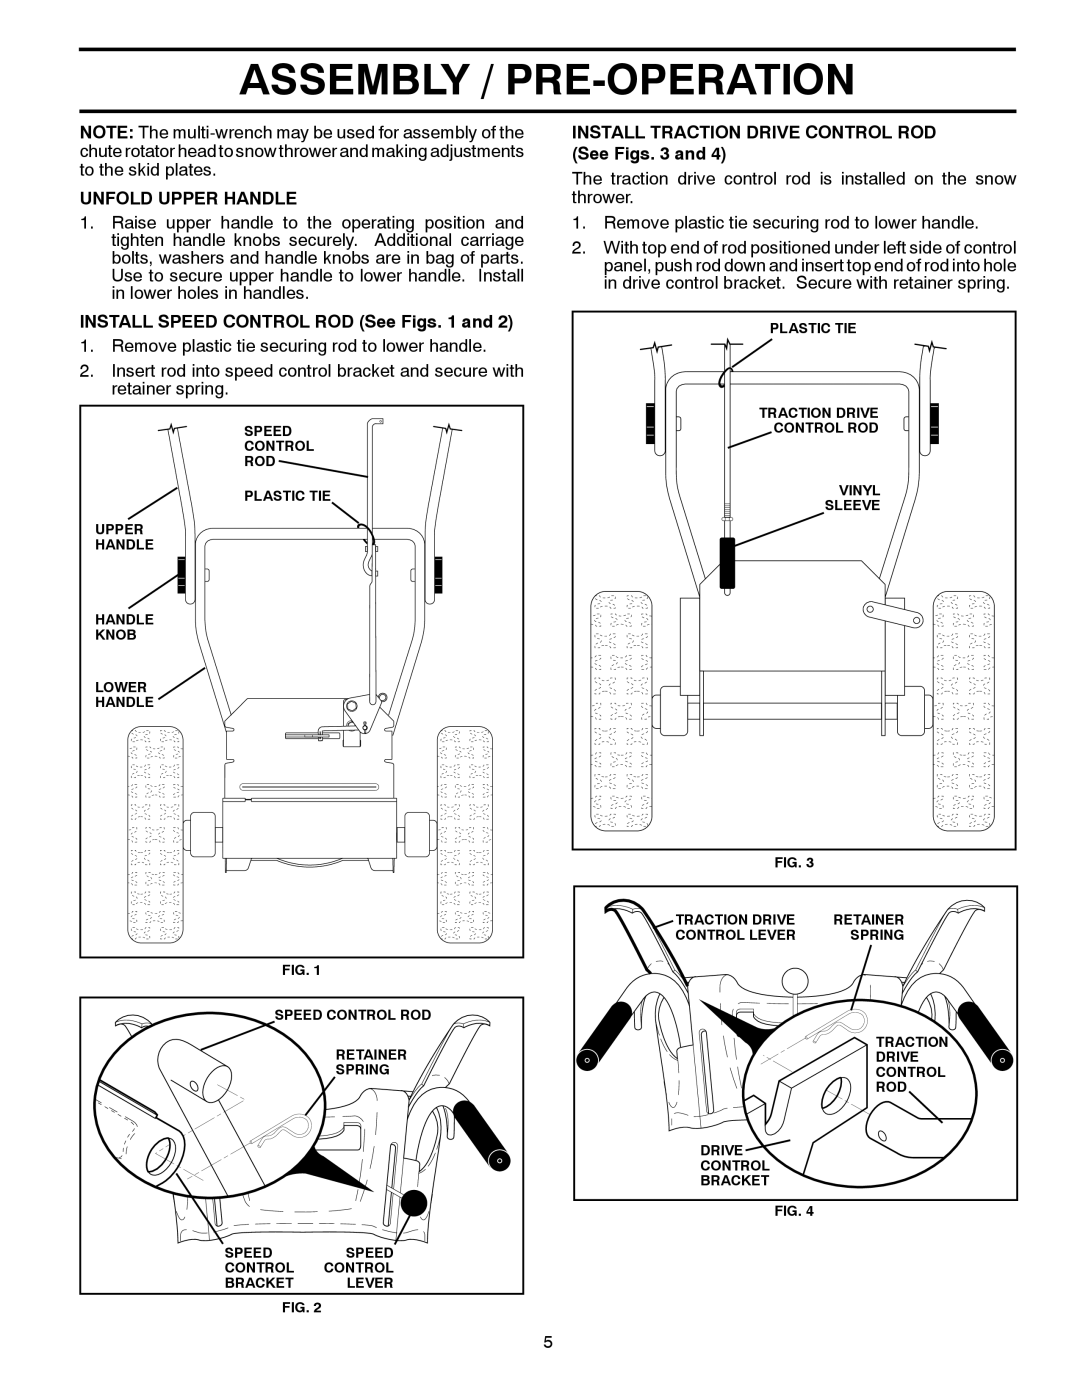 McCulloch 96192004102 owner manual Assembly / Pre-Operation, Unfold Upper Handle, INSTALL SPEED CONTROL ROD See Figs. 1 and 